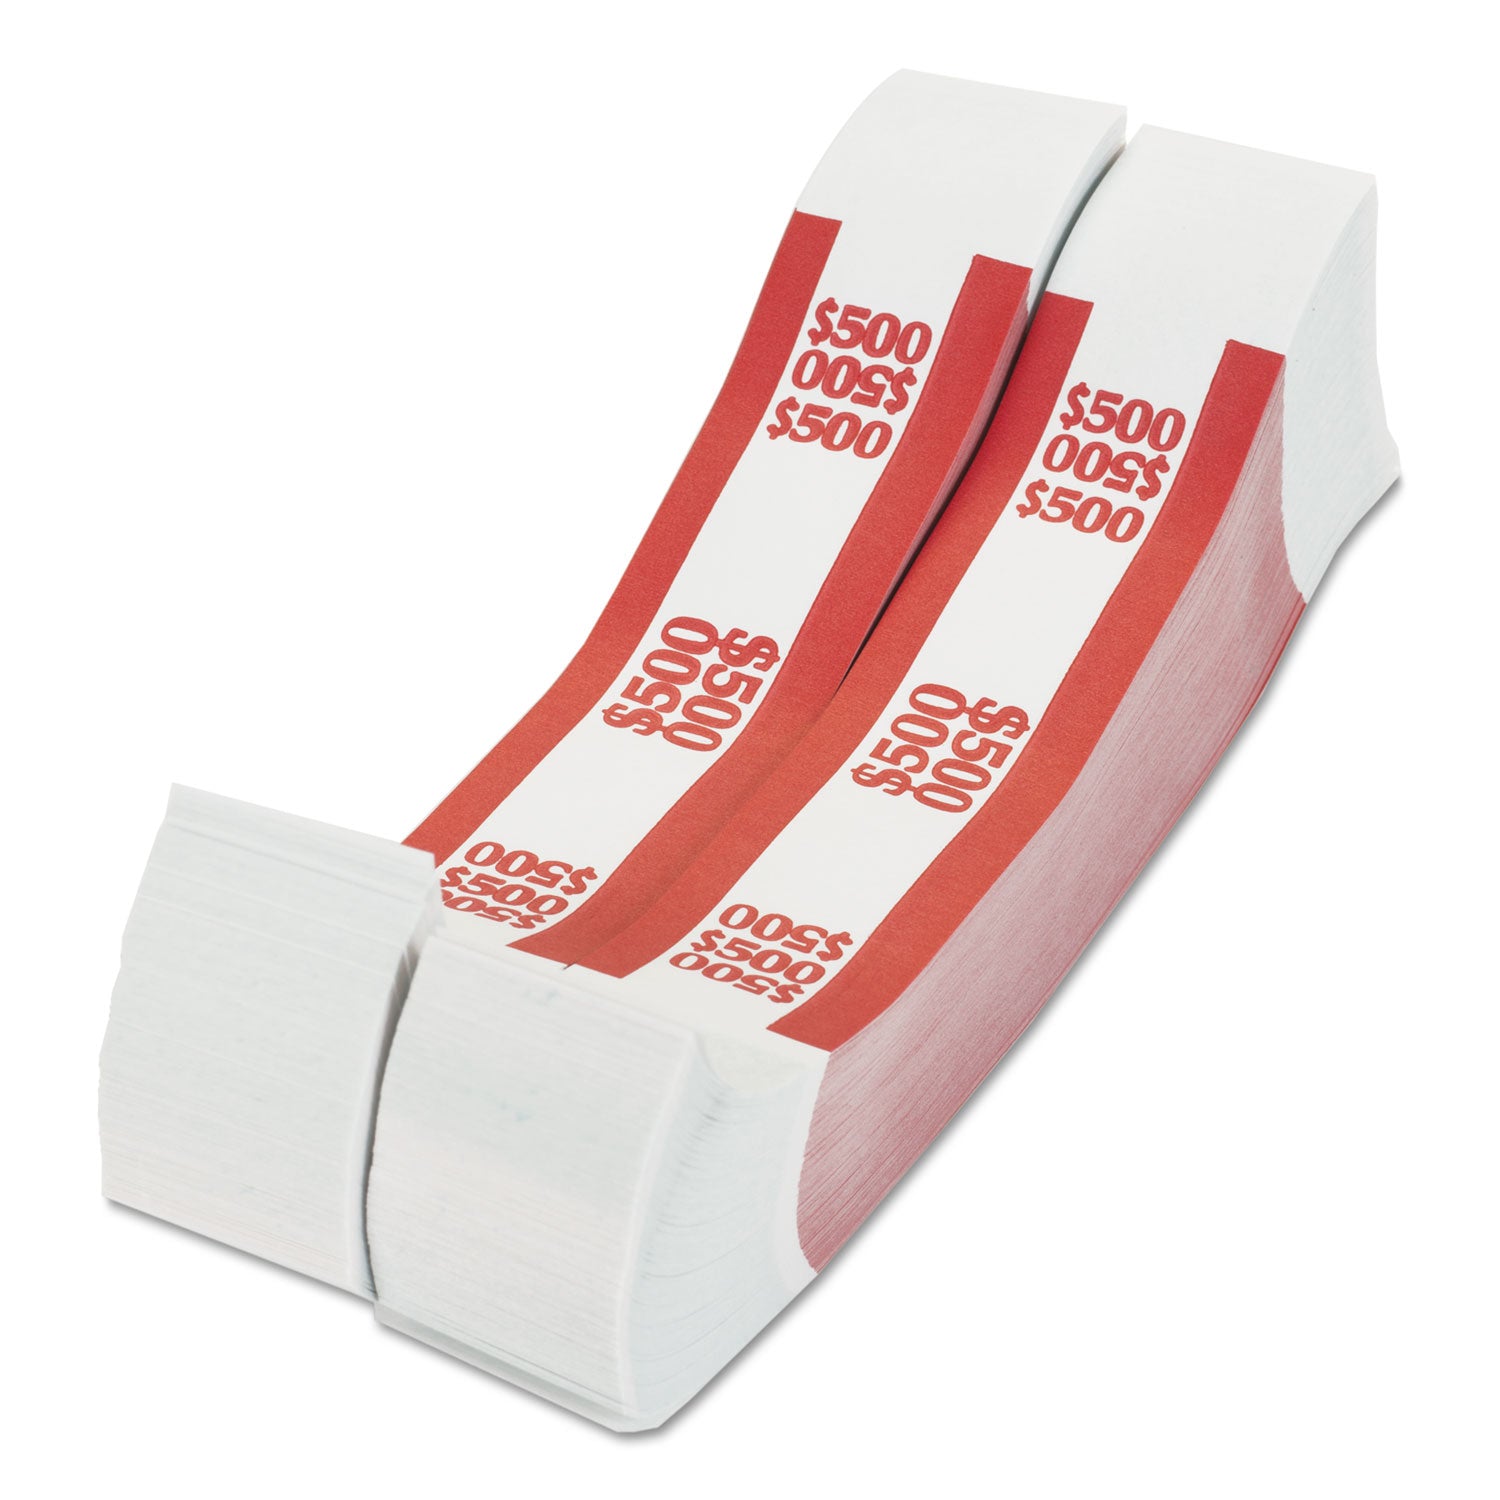 Currency Straps, Red, $500 in $5 Bills, 1000 Bands/Pack - 